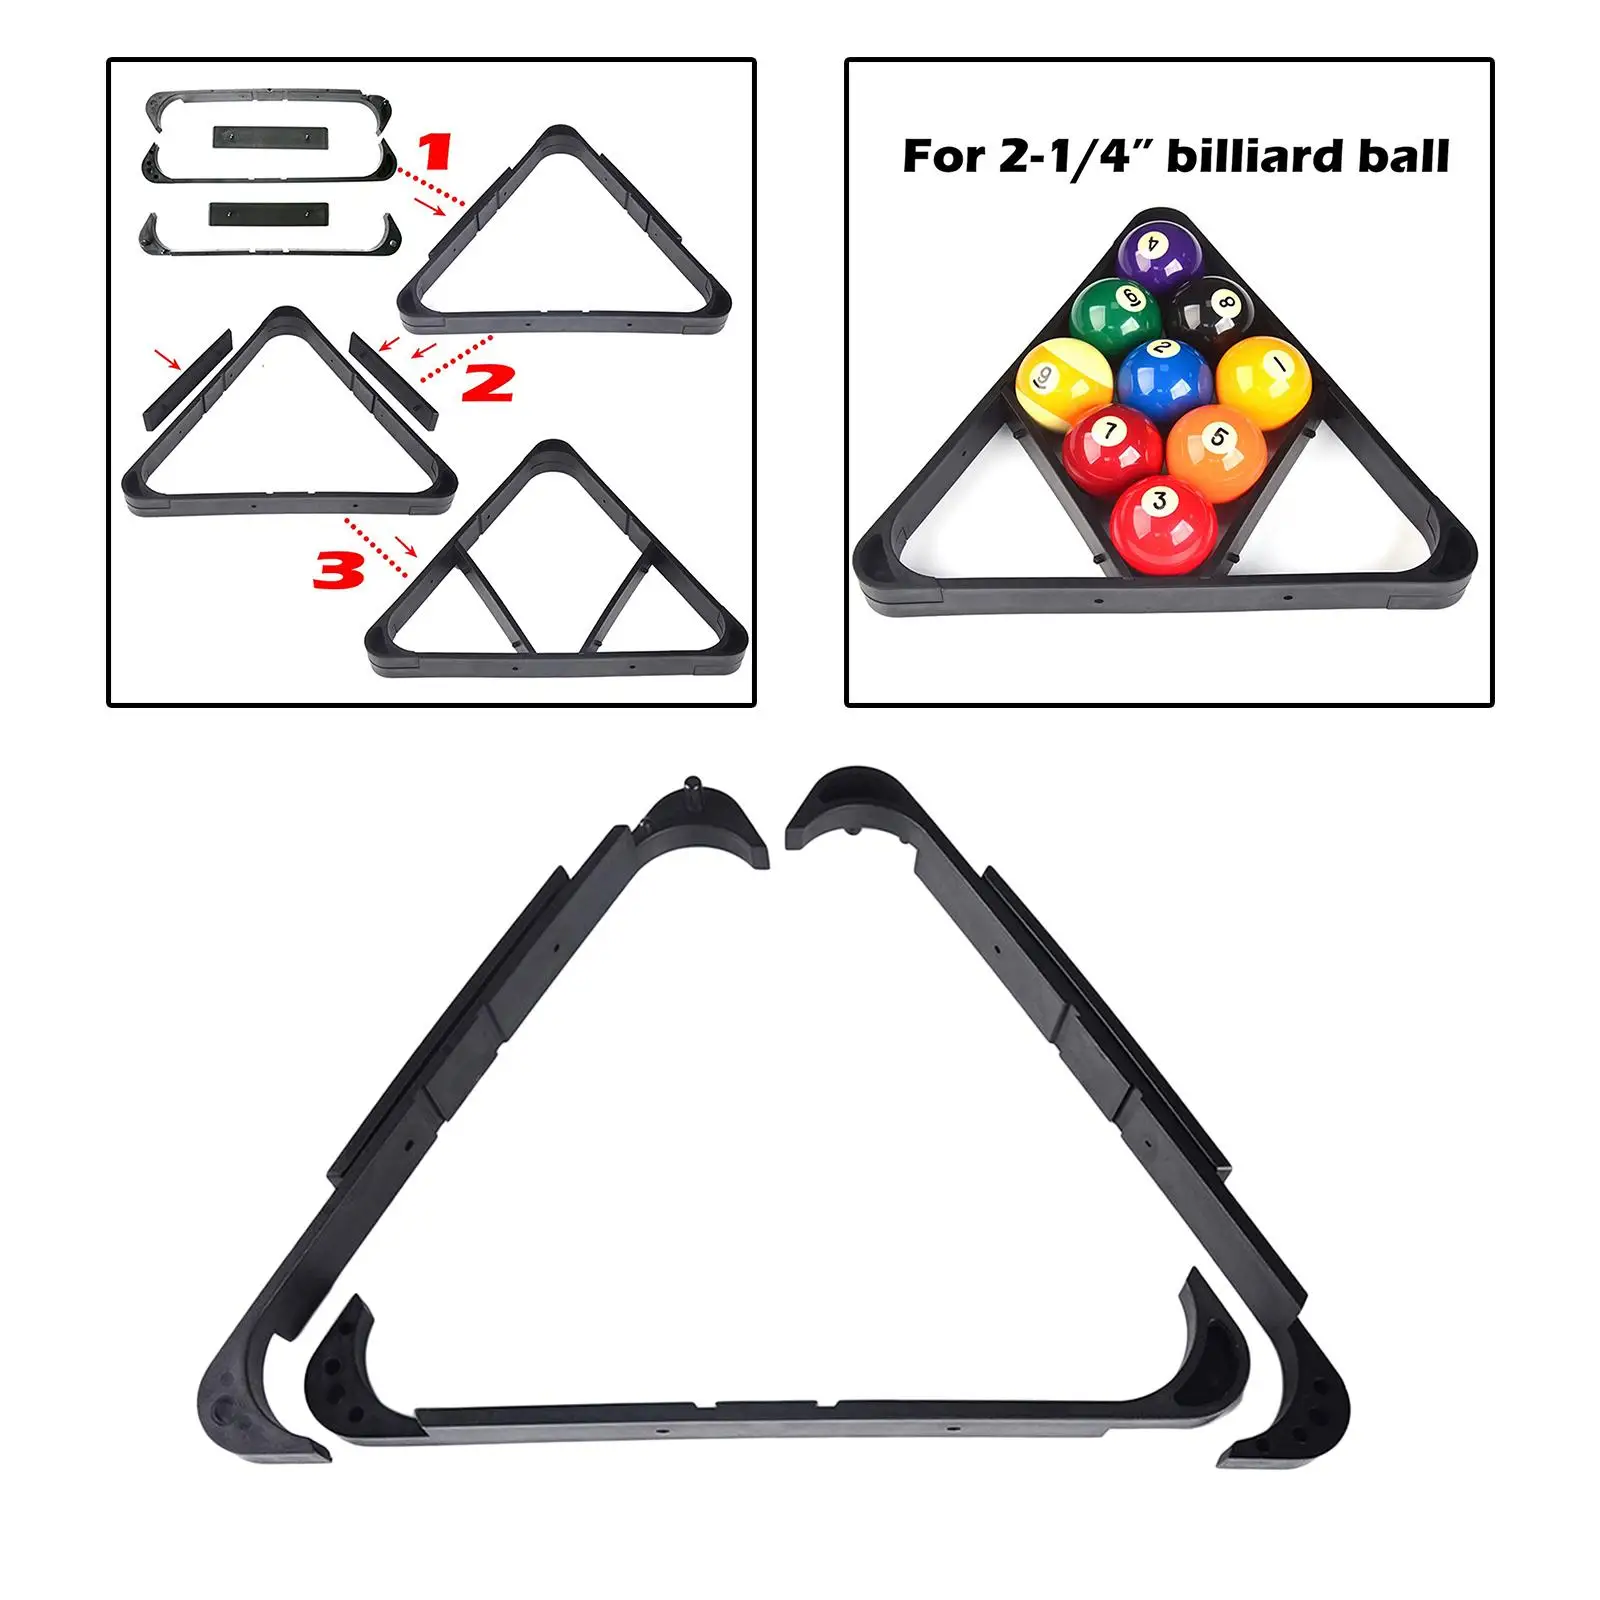 2 in 1 Billiard Triangle Ball Rack Pool Table Holders Snooker Accessories Durable Pool Rack for for 2-1/ 4inch Billiard Ball